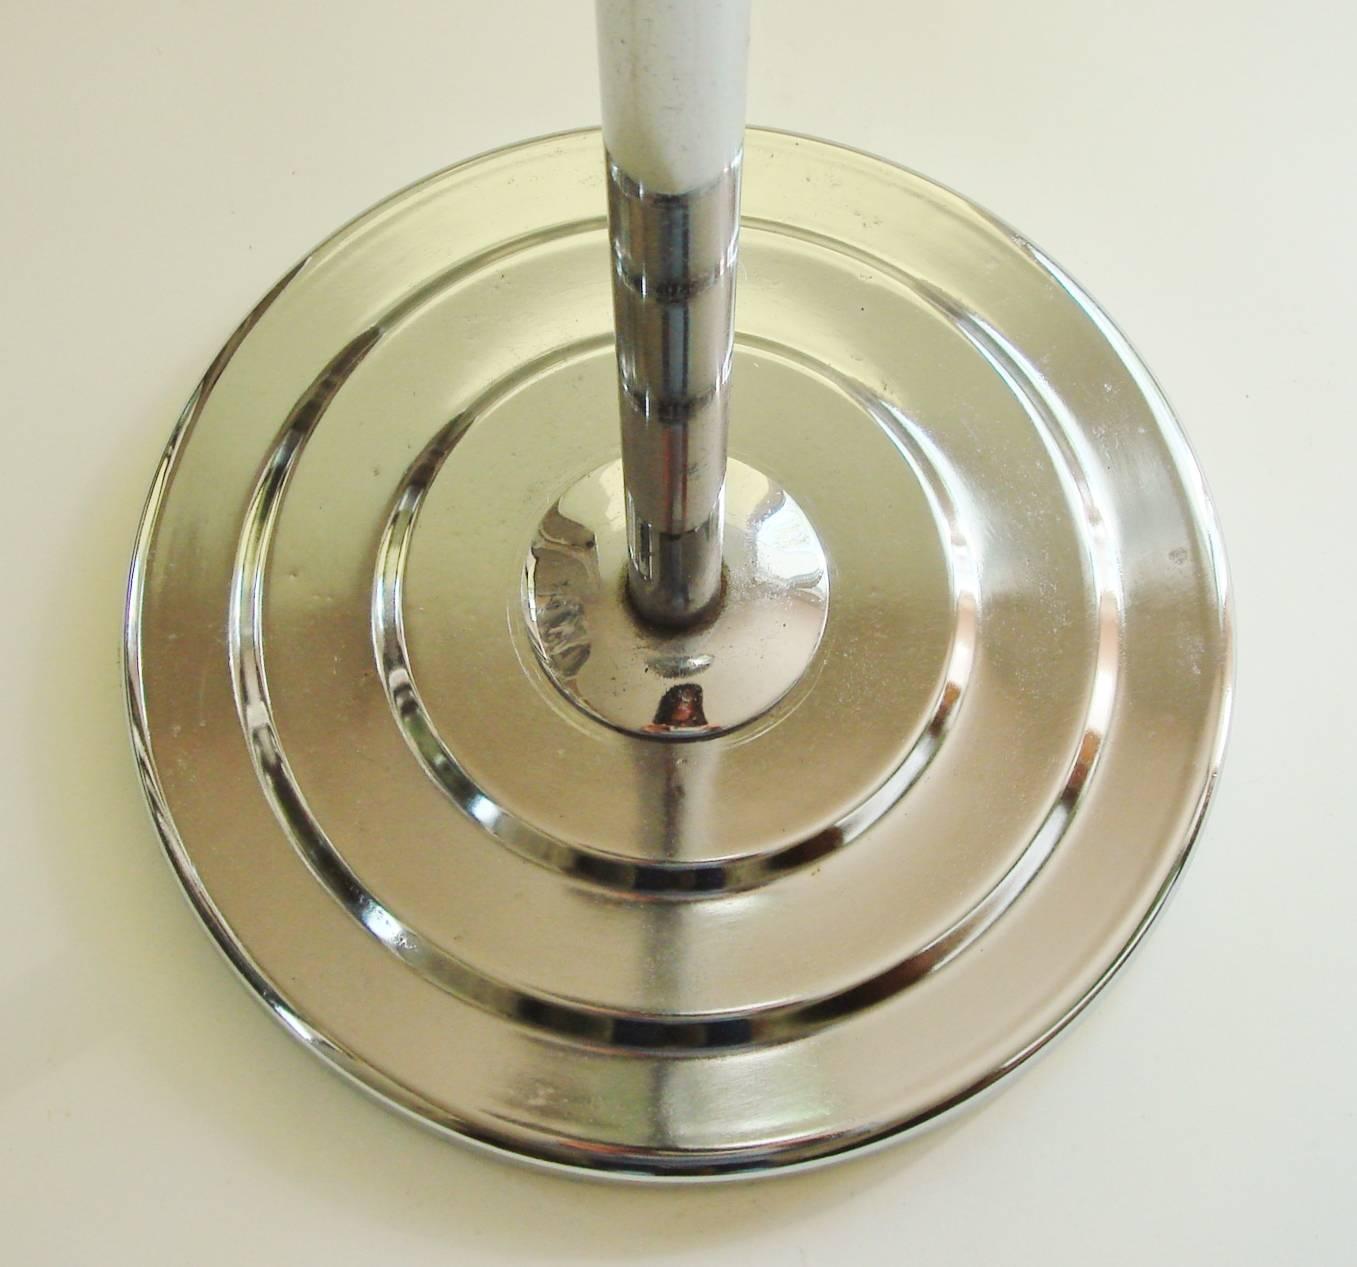 American Art Deco Chrome, Enamel and Frosted Glass Floor Uplighter/Torchiere In Good Condition For Sale In Port Hope, ON